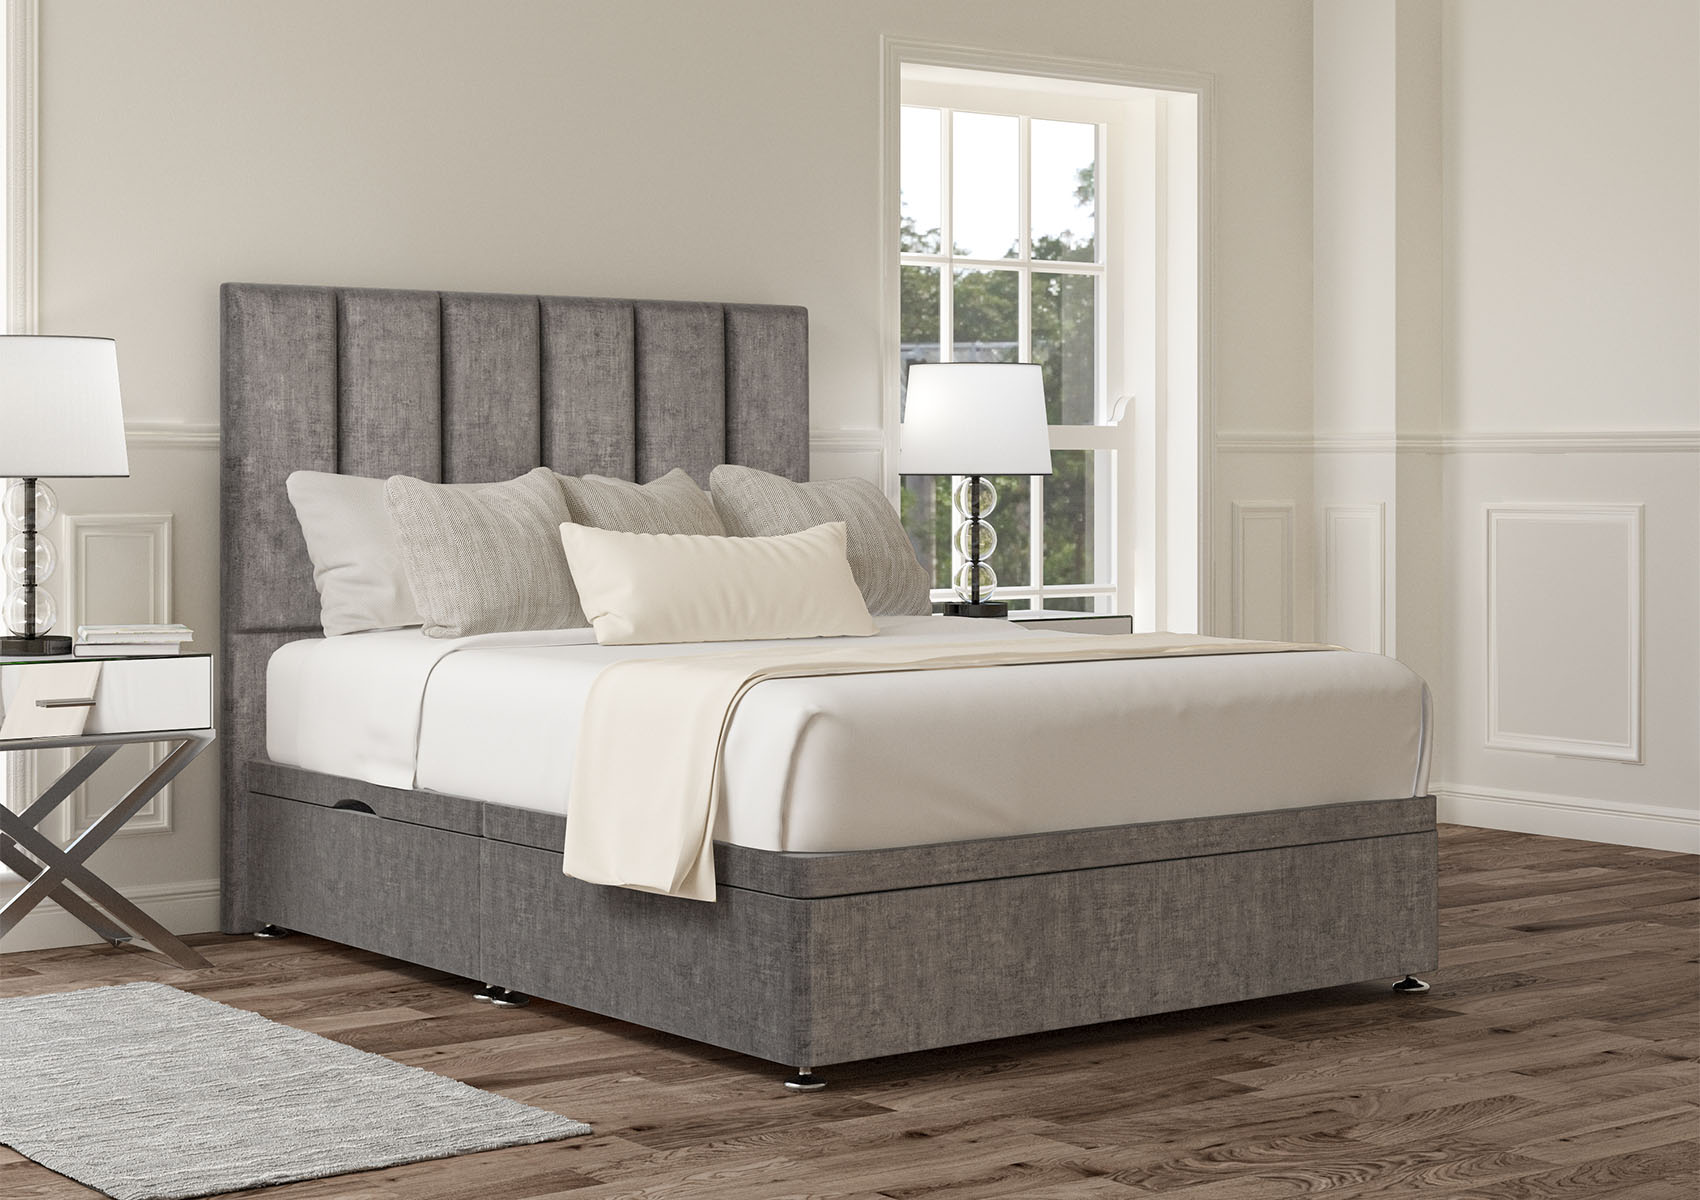 View Empire Heritage Steel Upholstered Single Ottoman Bed Time4Sleep information